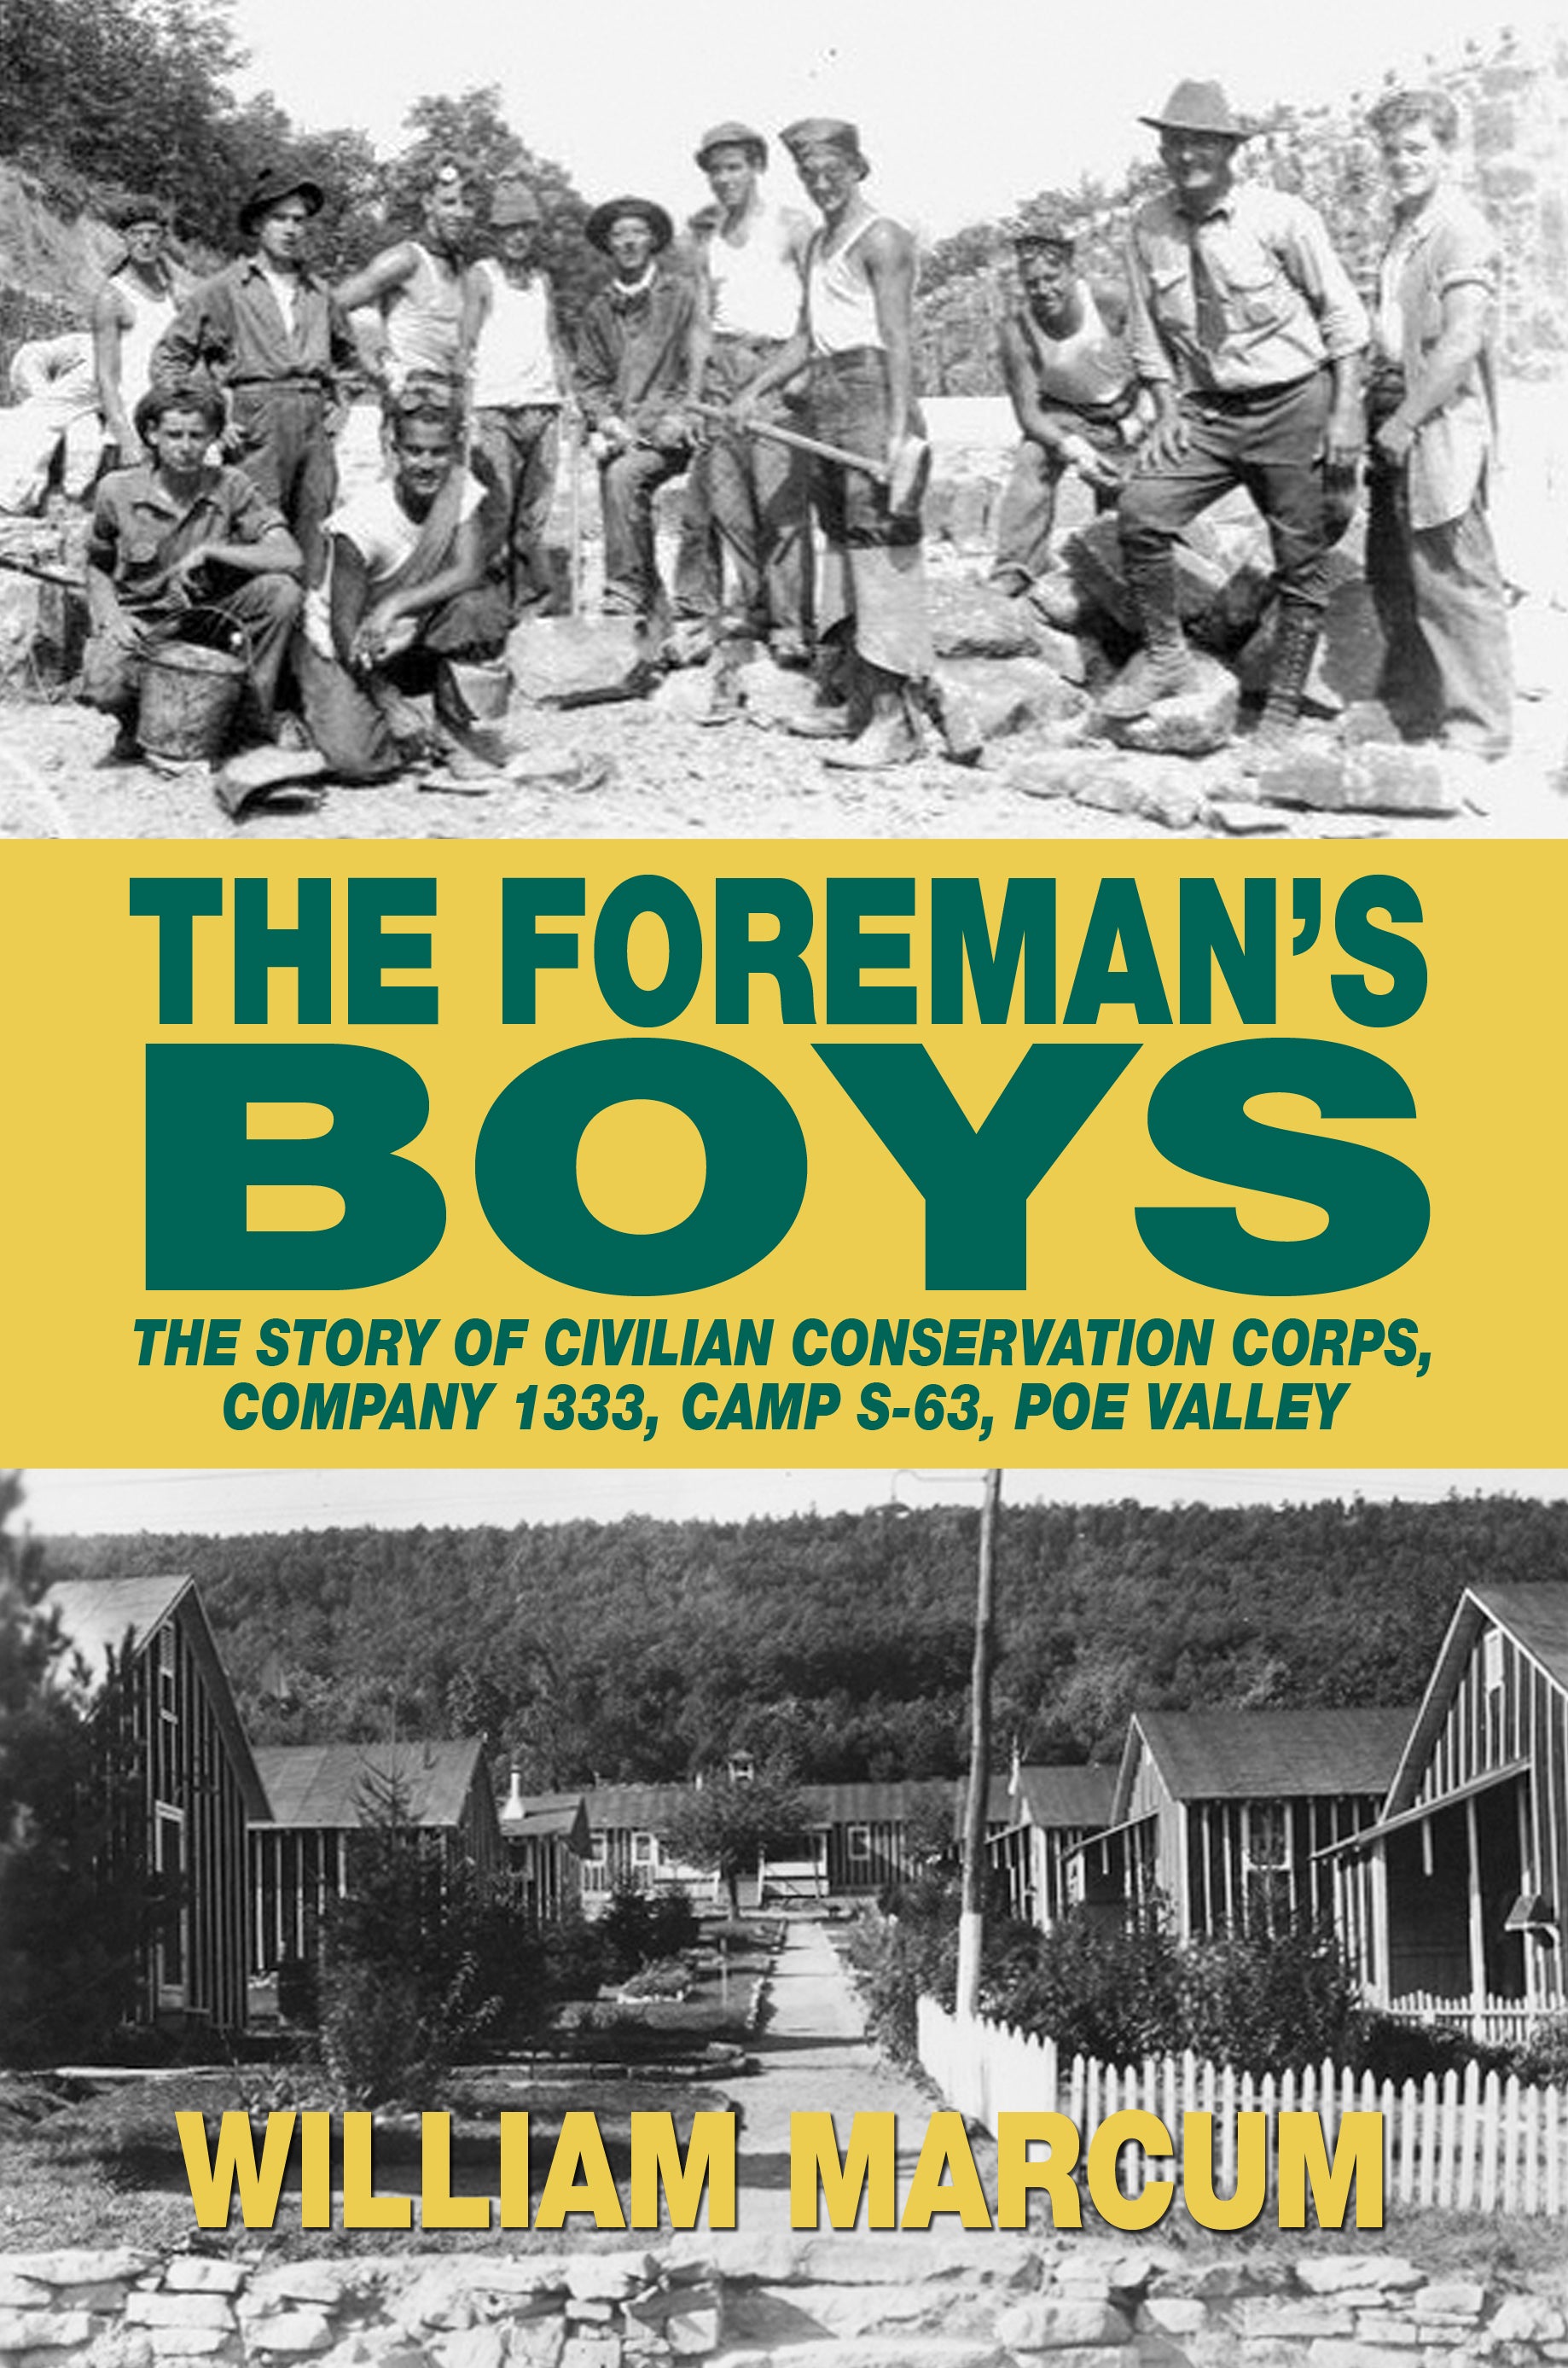 William Marcum’s “The Foreman's Boys” tops as the Sunbury Press bestseller for August